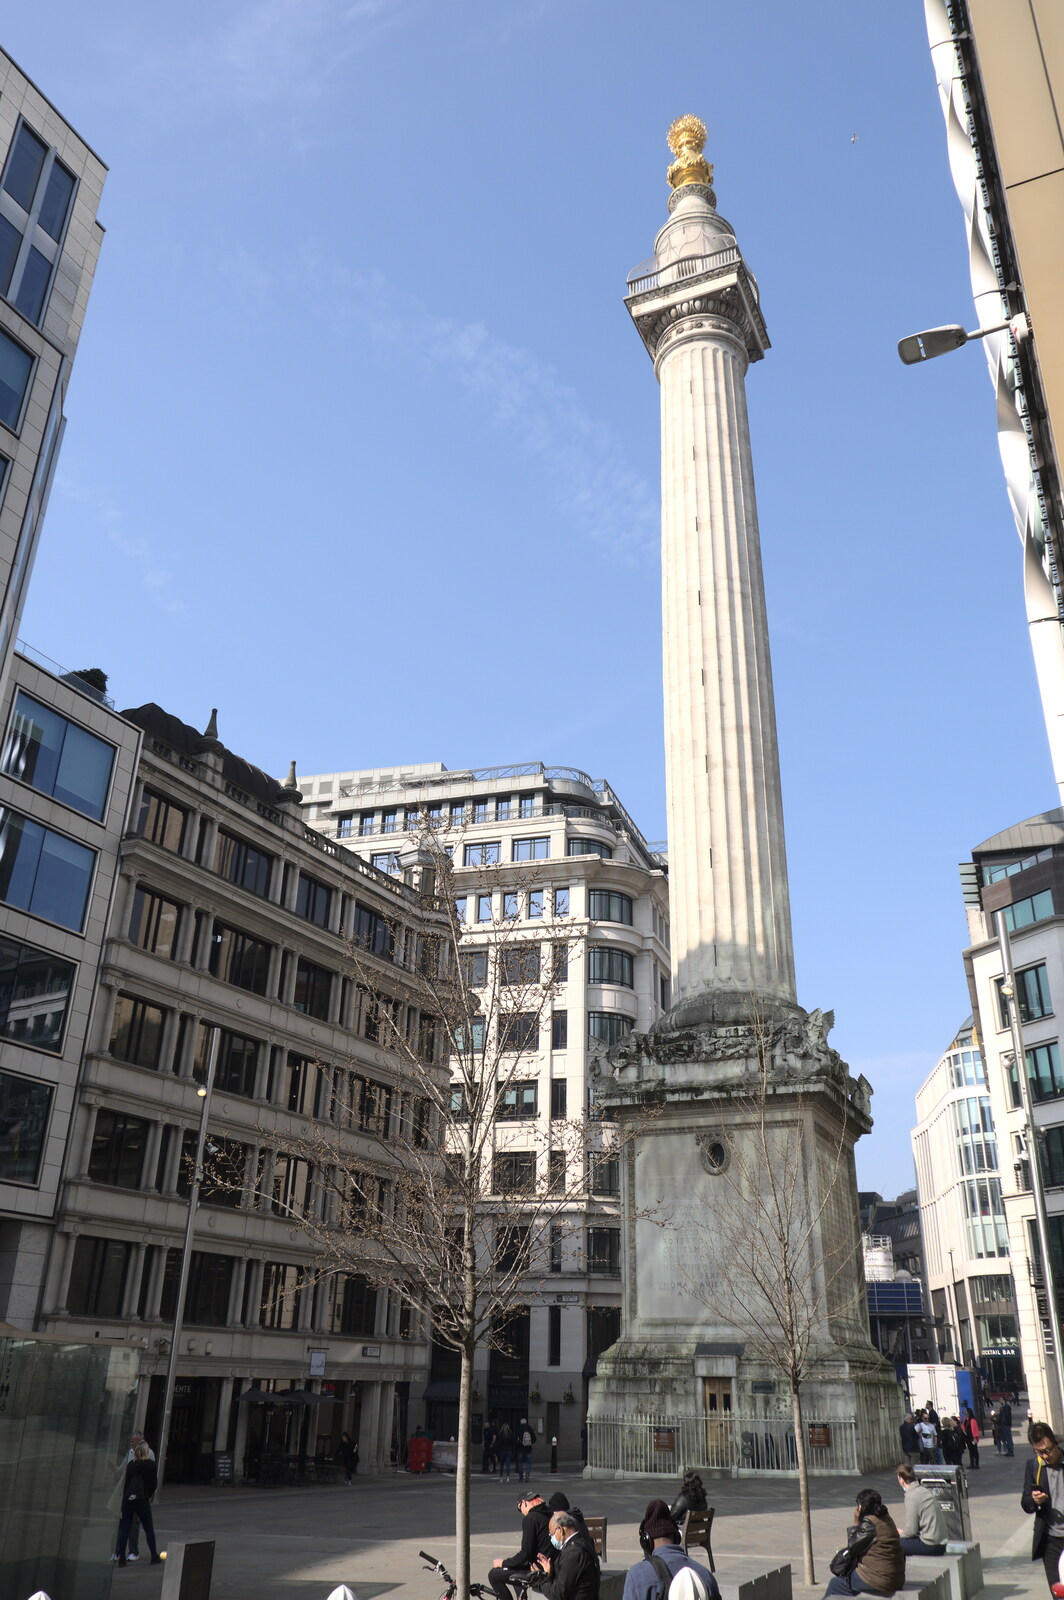 A Walk Around the South Bank, London - 25th March 2022: The Great Fire Monument is almost hidden